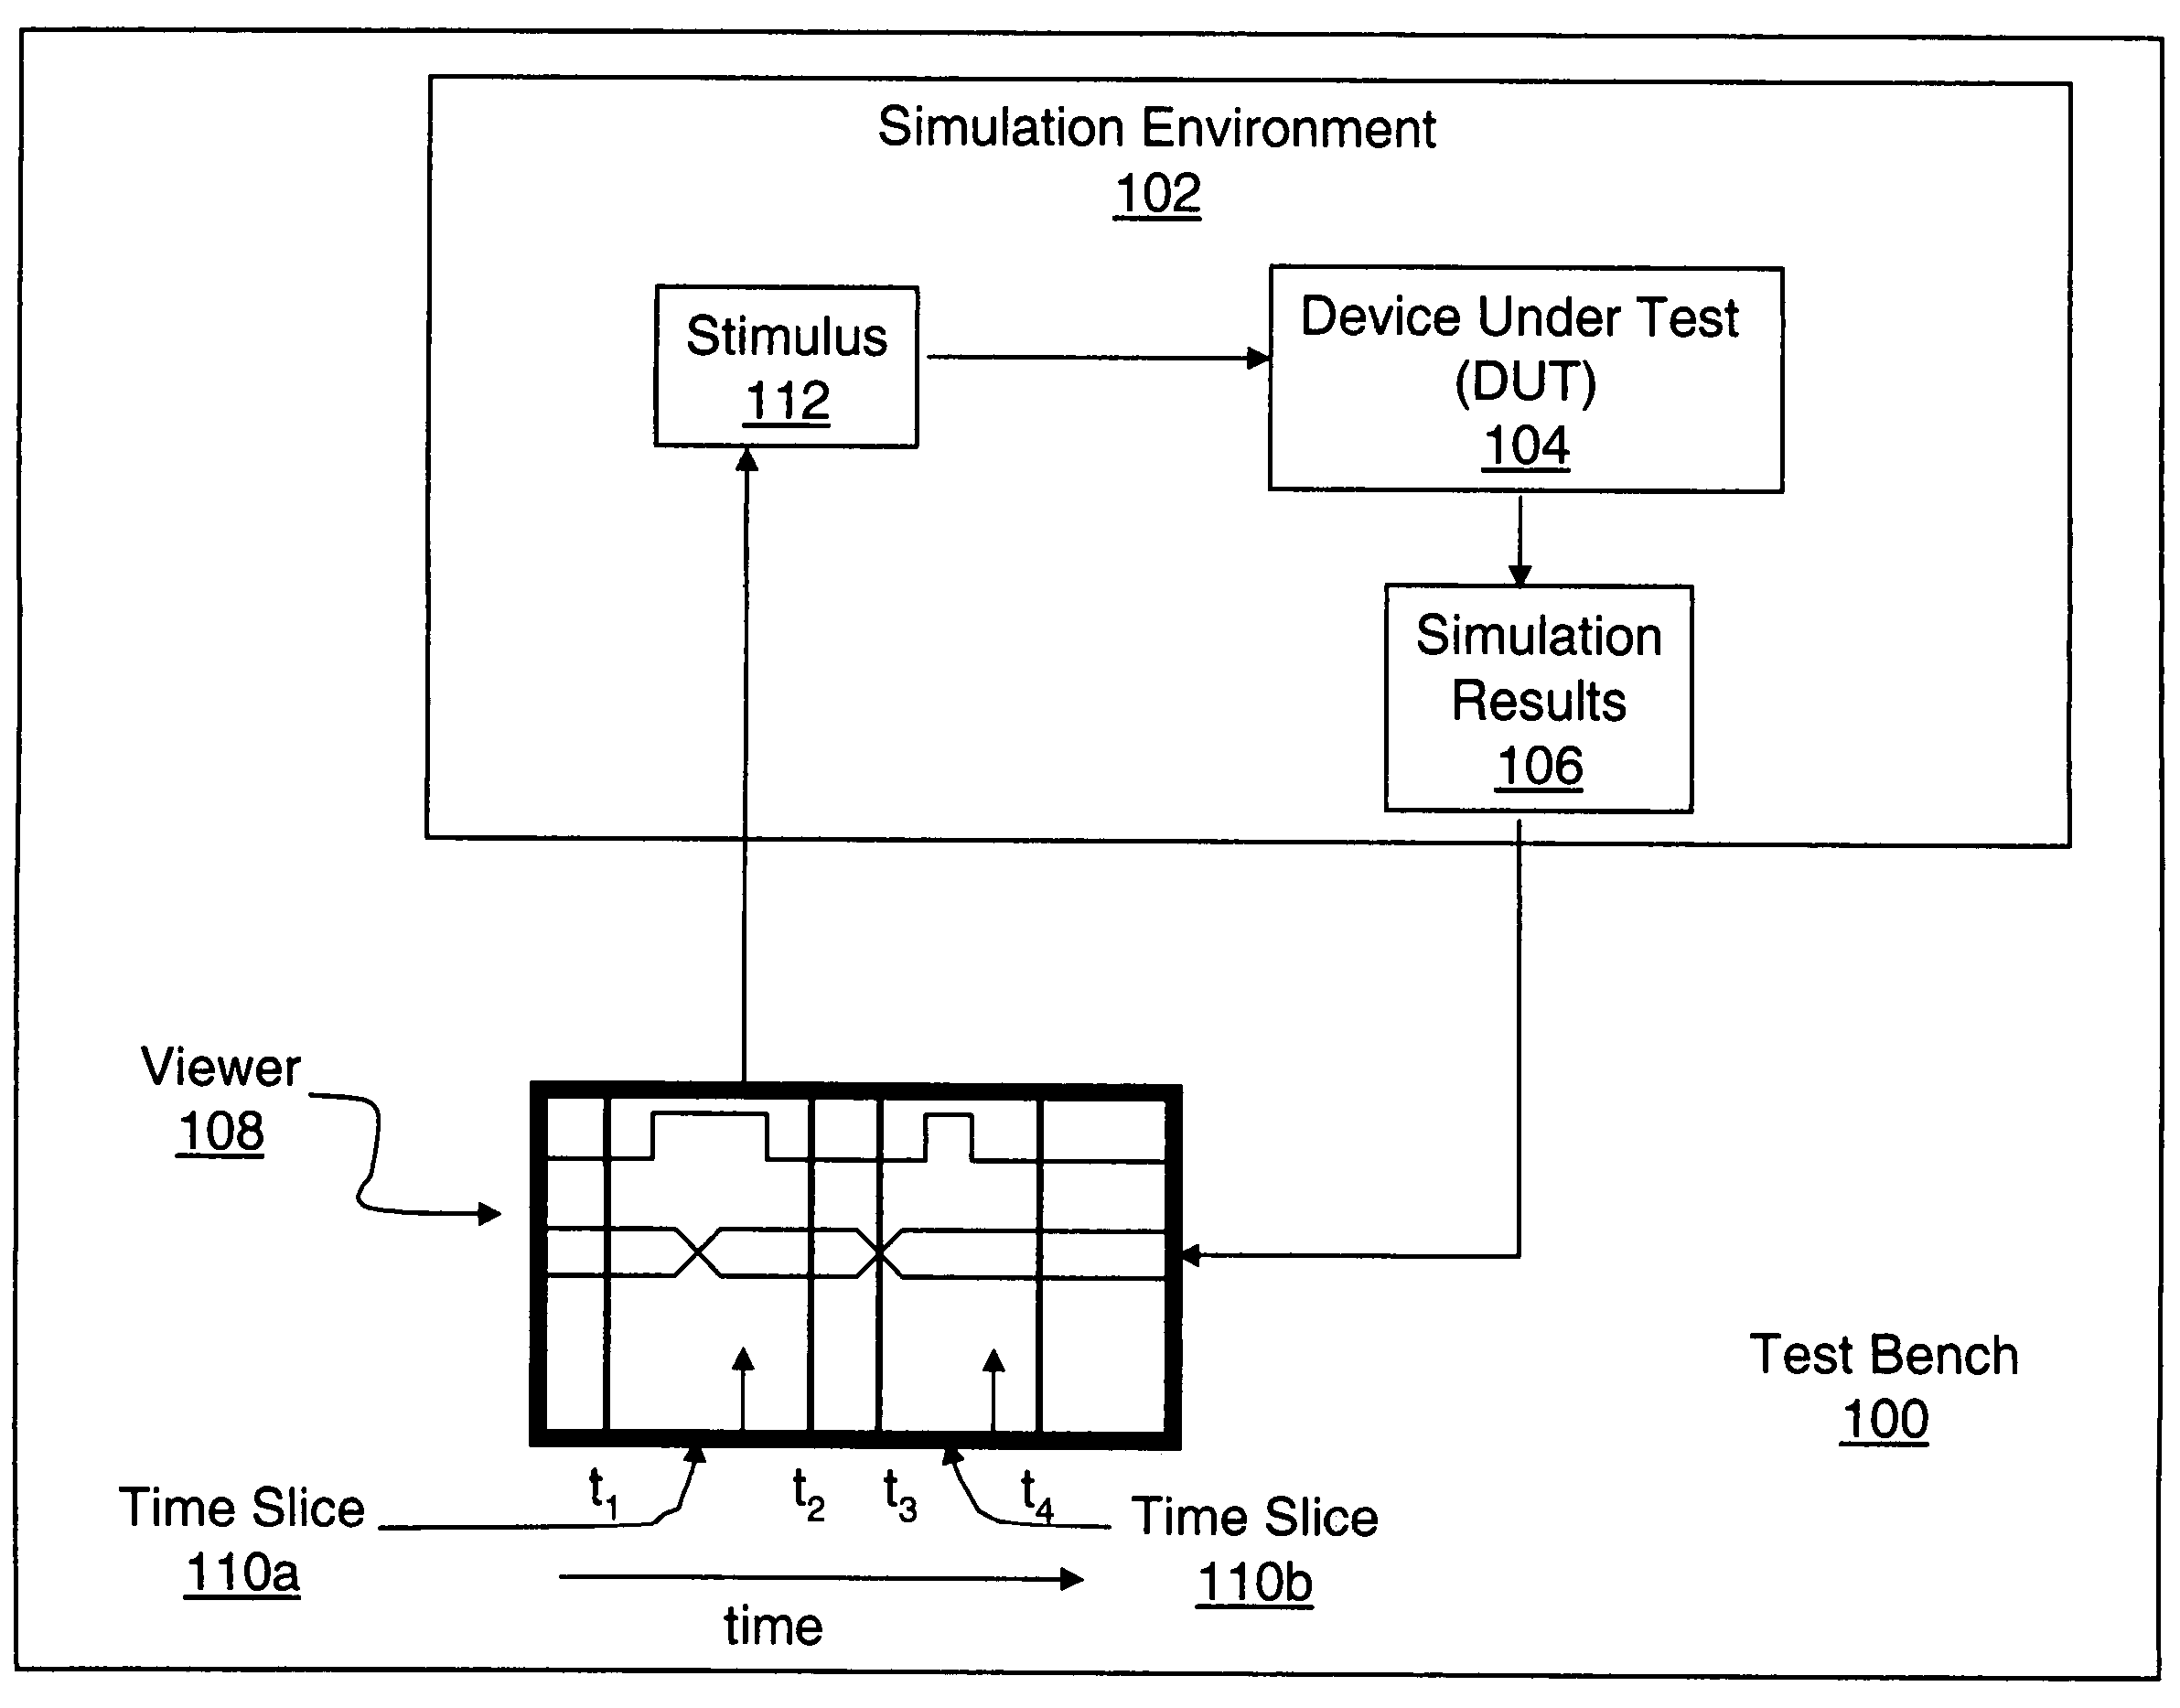 Stimulus extraction and sequence generation for an electric device under test